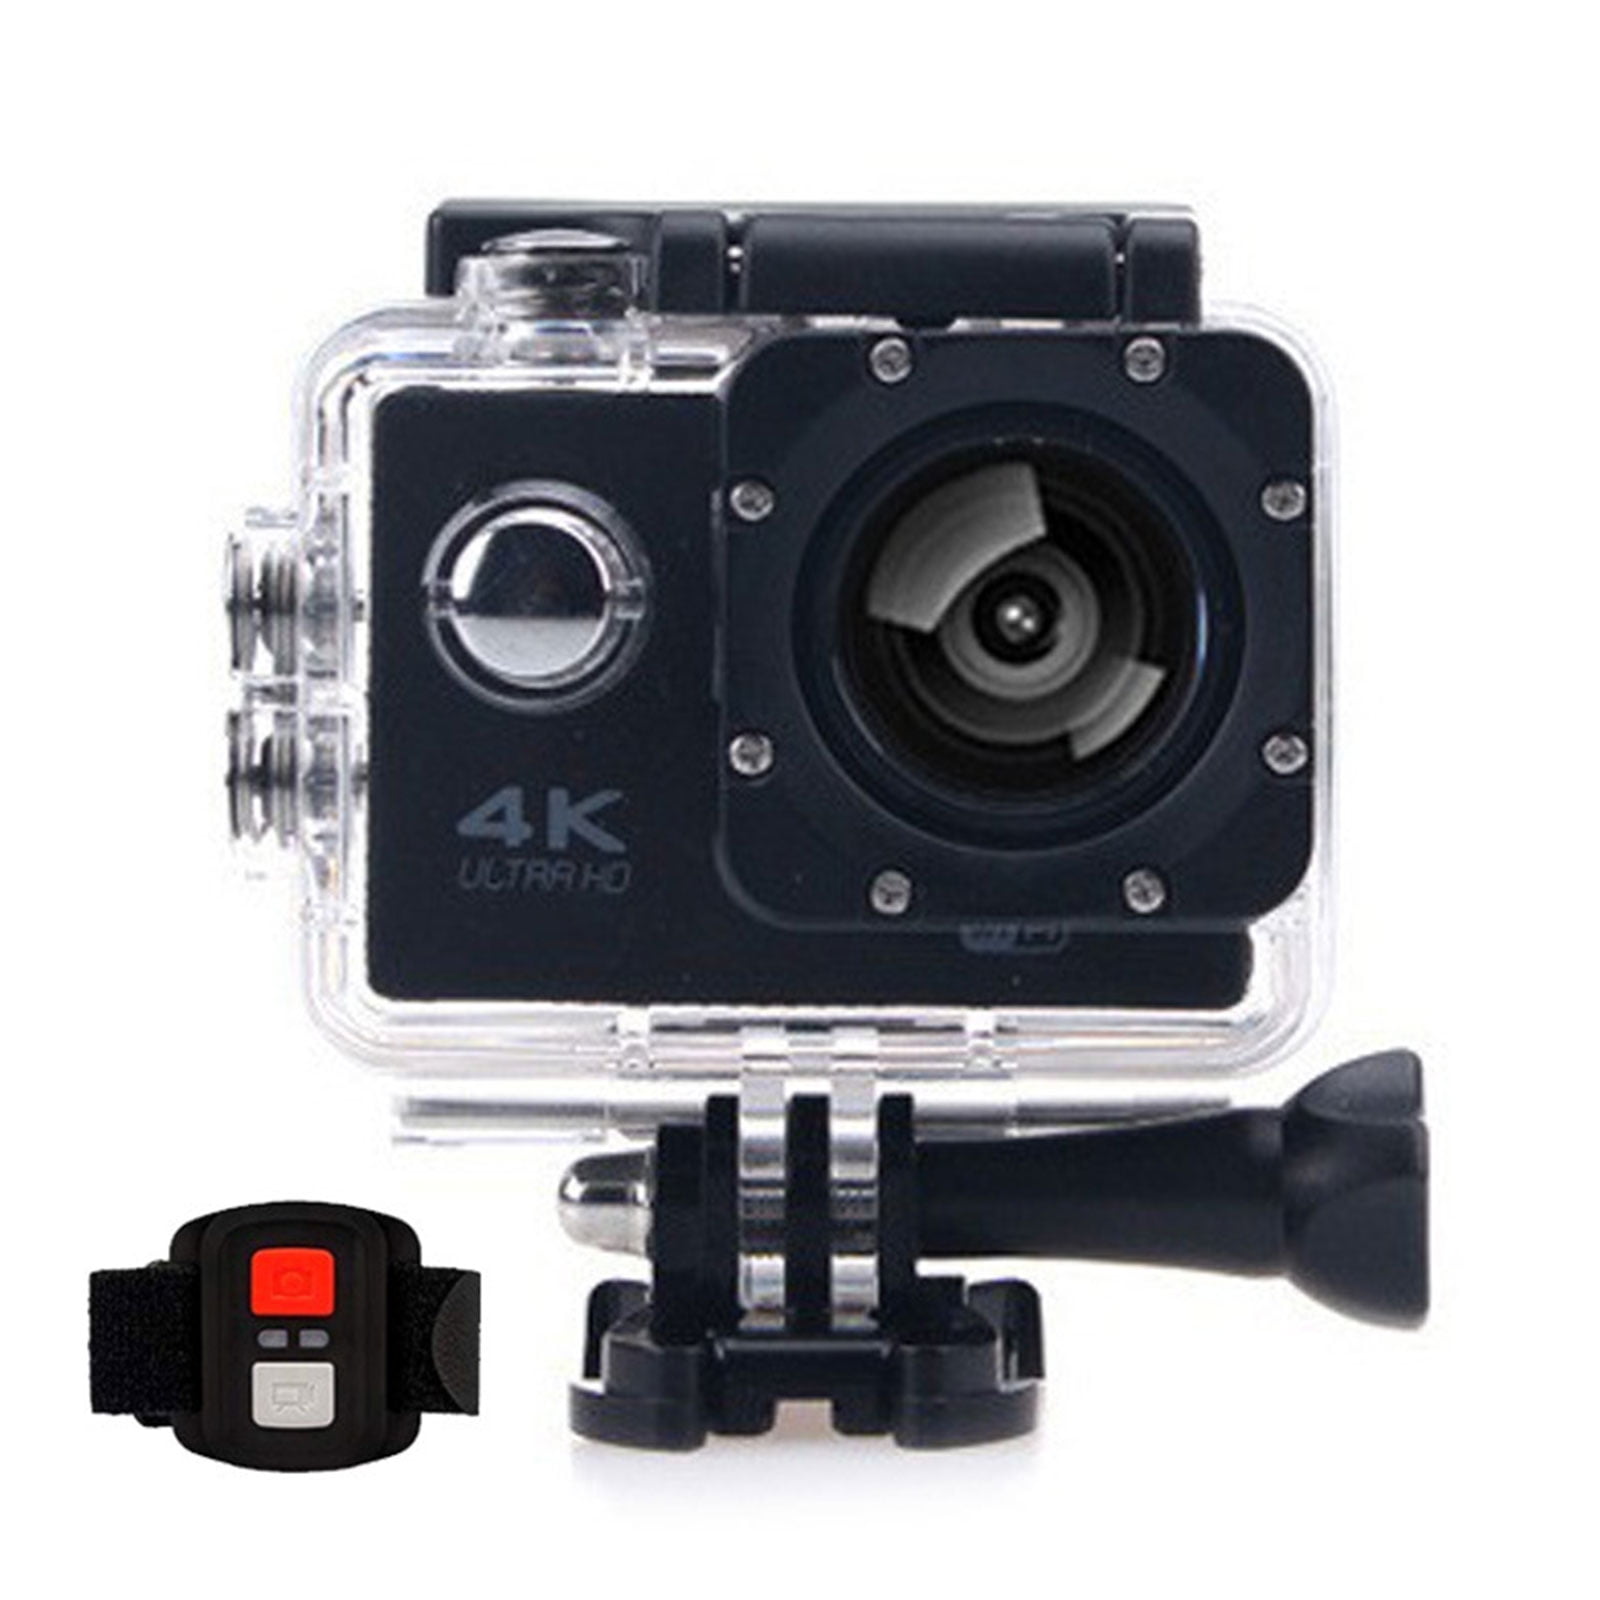 16MP 4K ultra HD 1080p WiFi waterproof 30m action Camera sports Cam  Camcorder price in Egypt,  Egypt